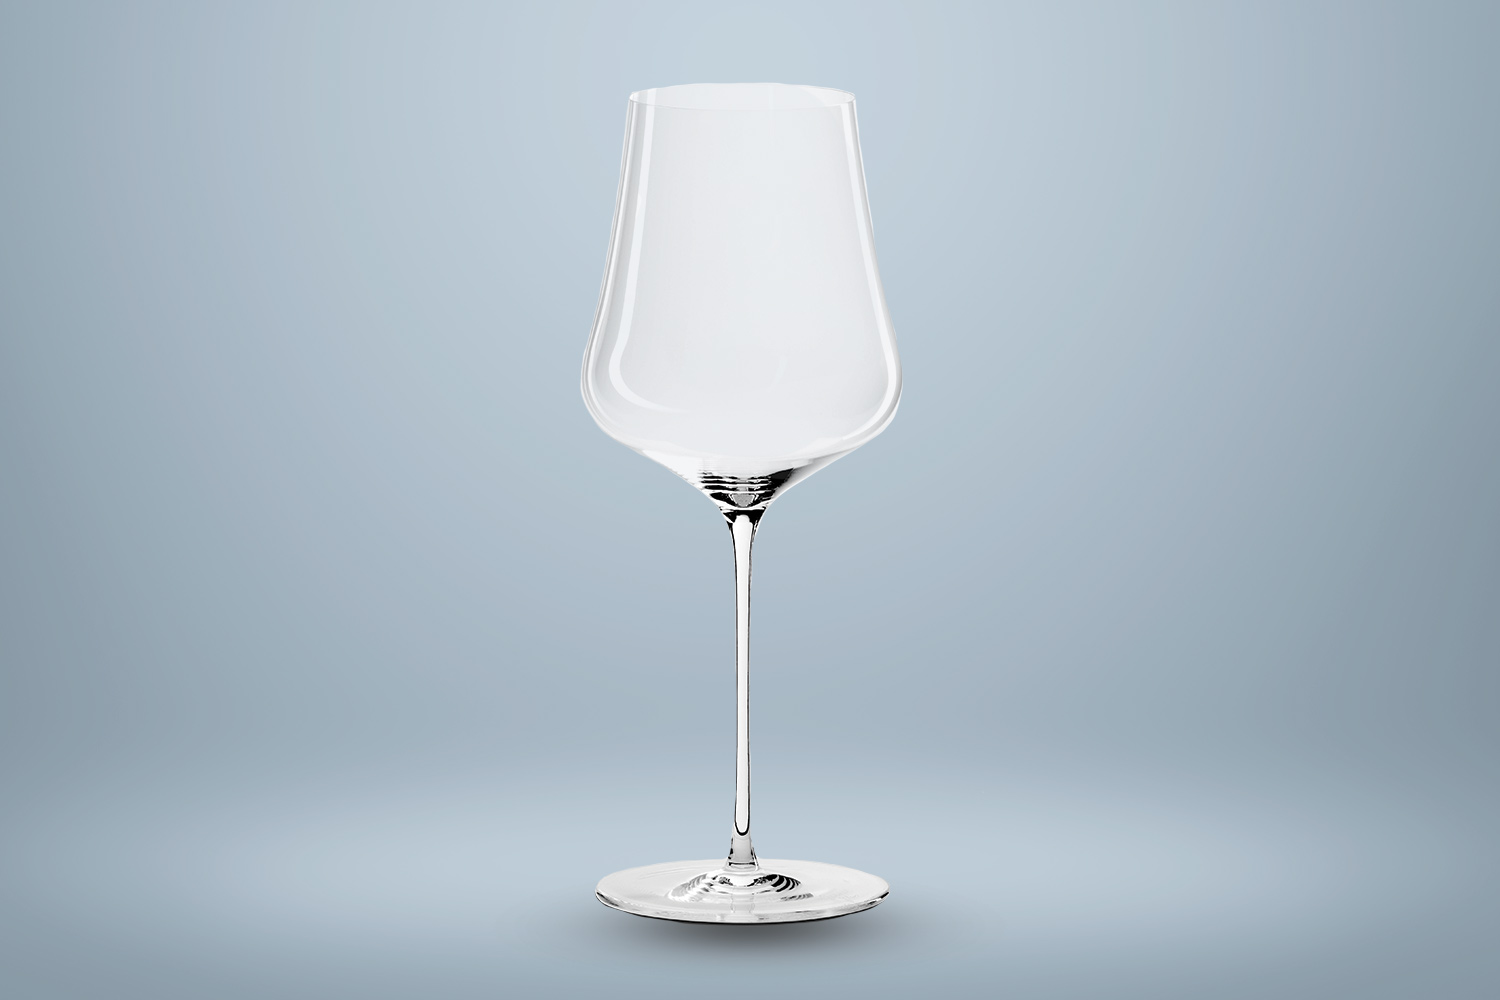 5 best universal wine glasses of 2022: Tested and reviewed